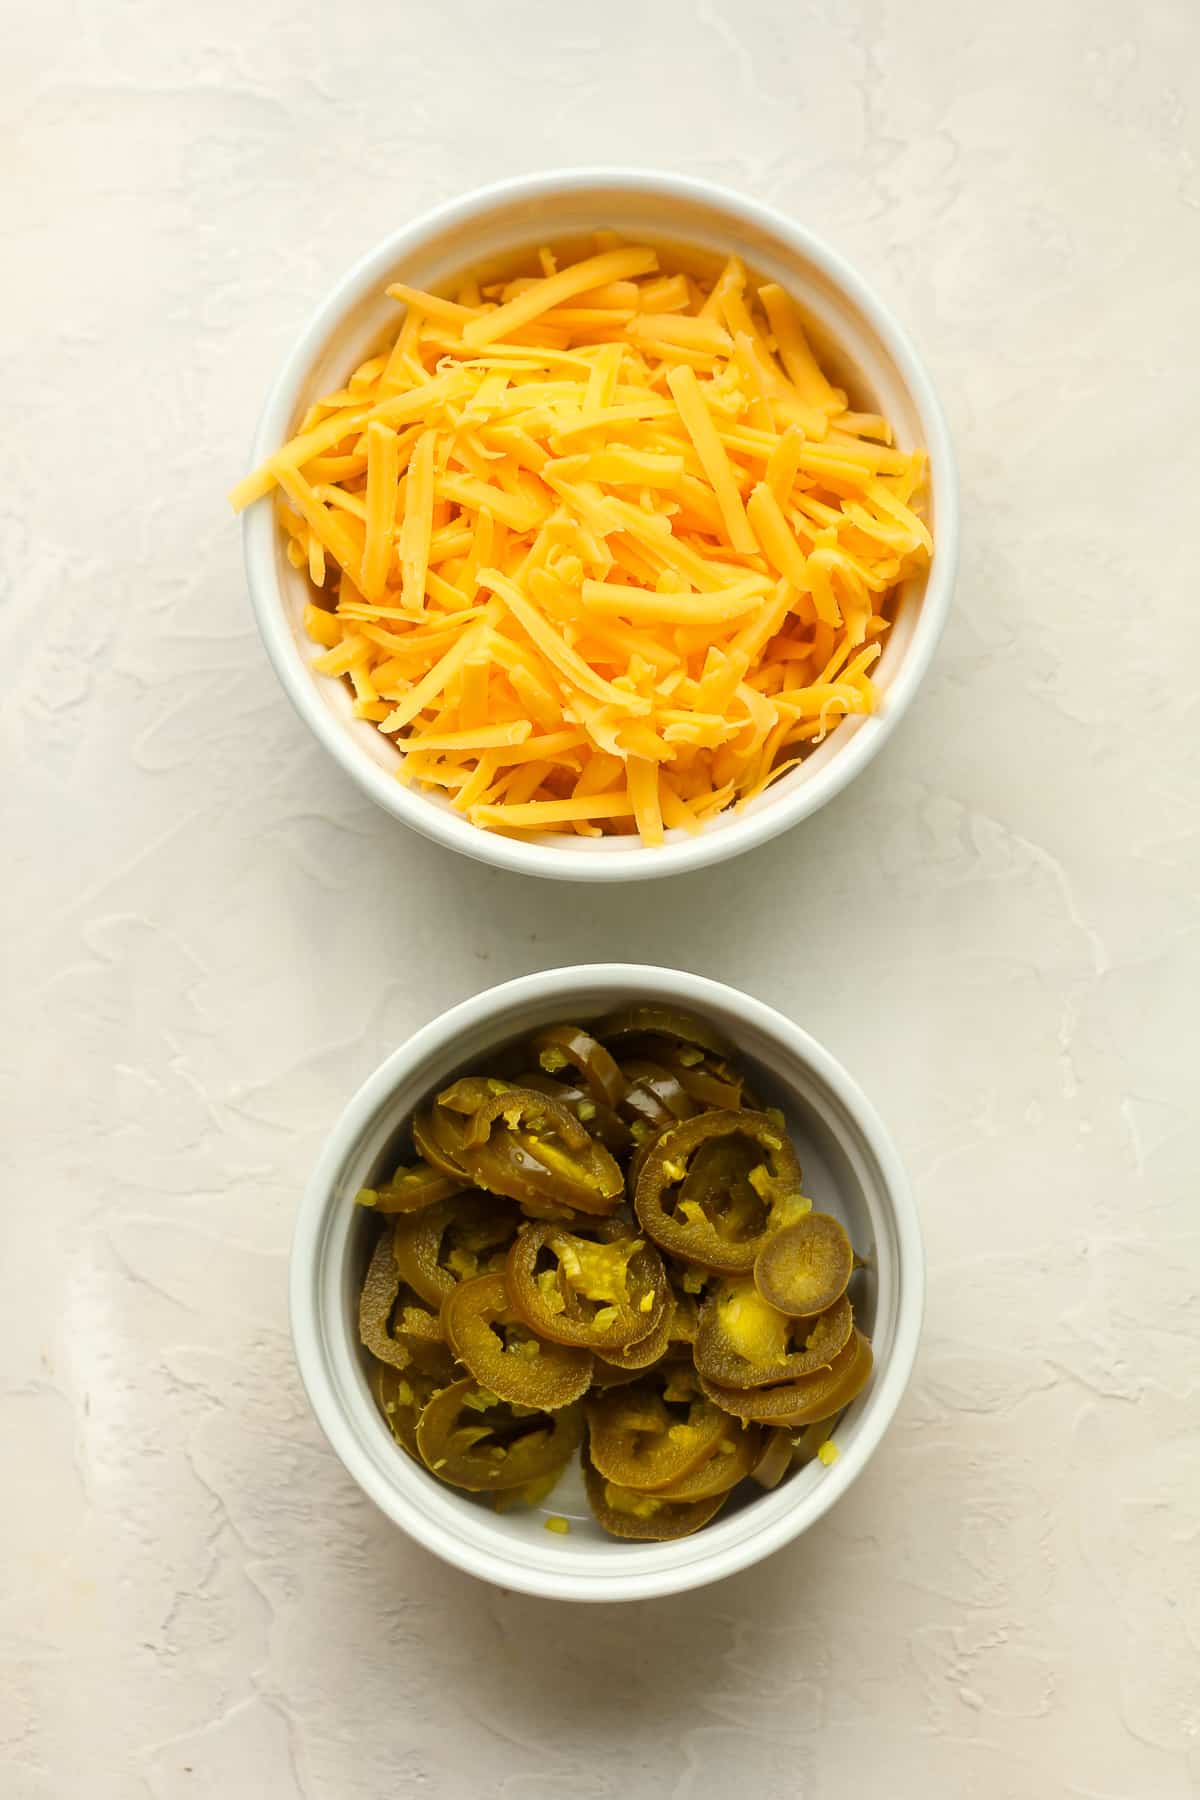 Two bowls - one with shredded cheddar cheese and the other with jarred jalapenos.